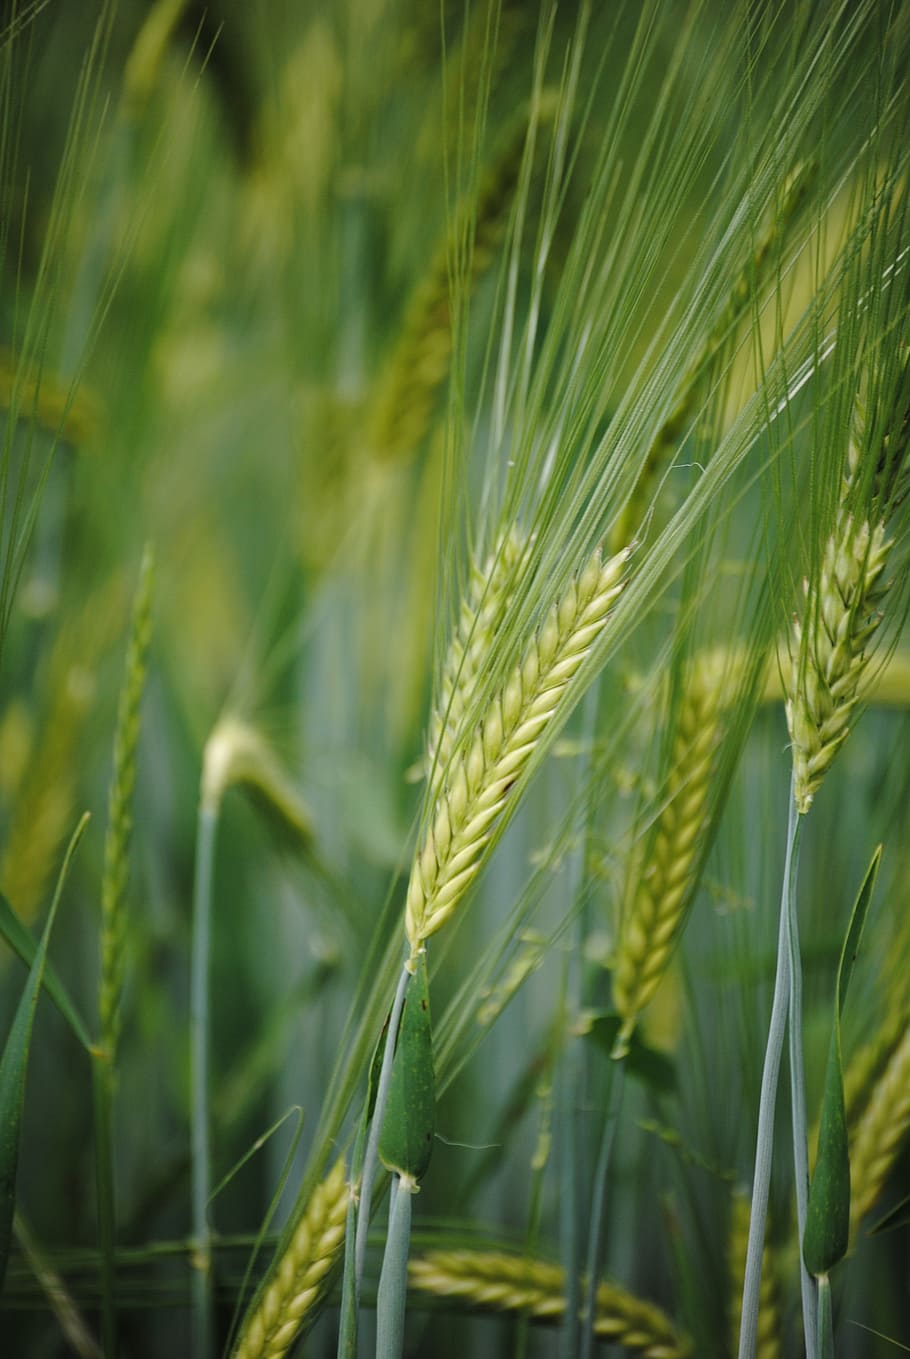 ear, cornfield, grain of wheat, growth, plant, cereal plant, agriculture, crop, green color, land